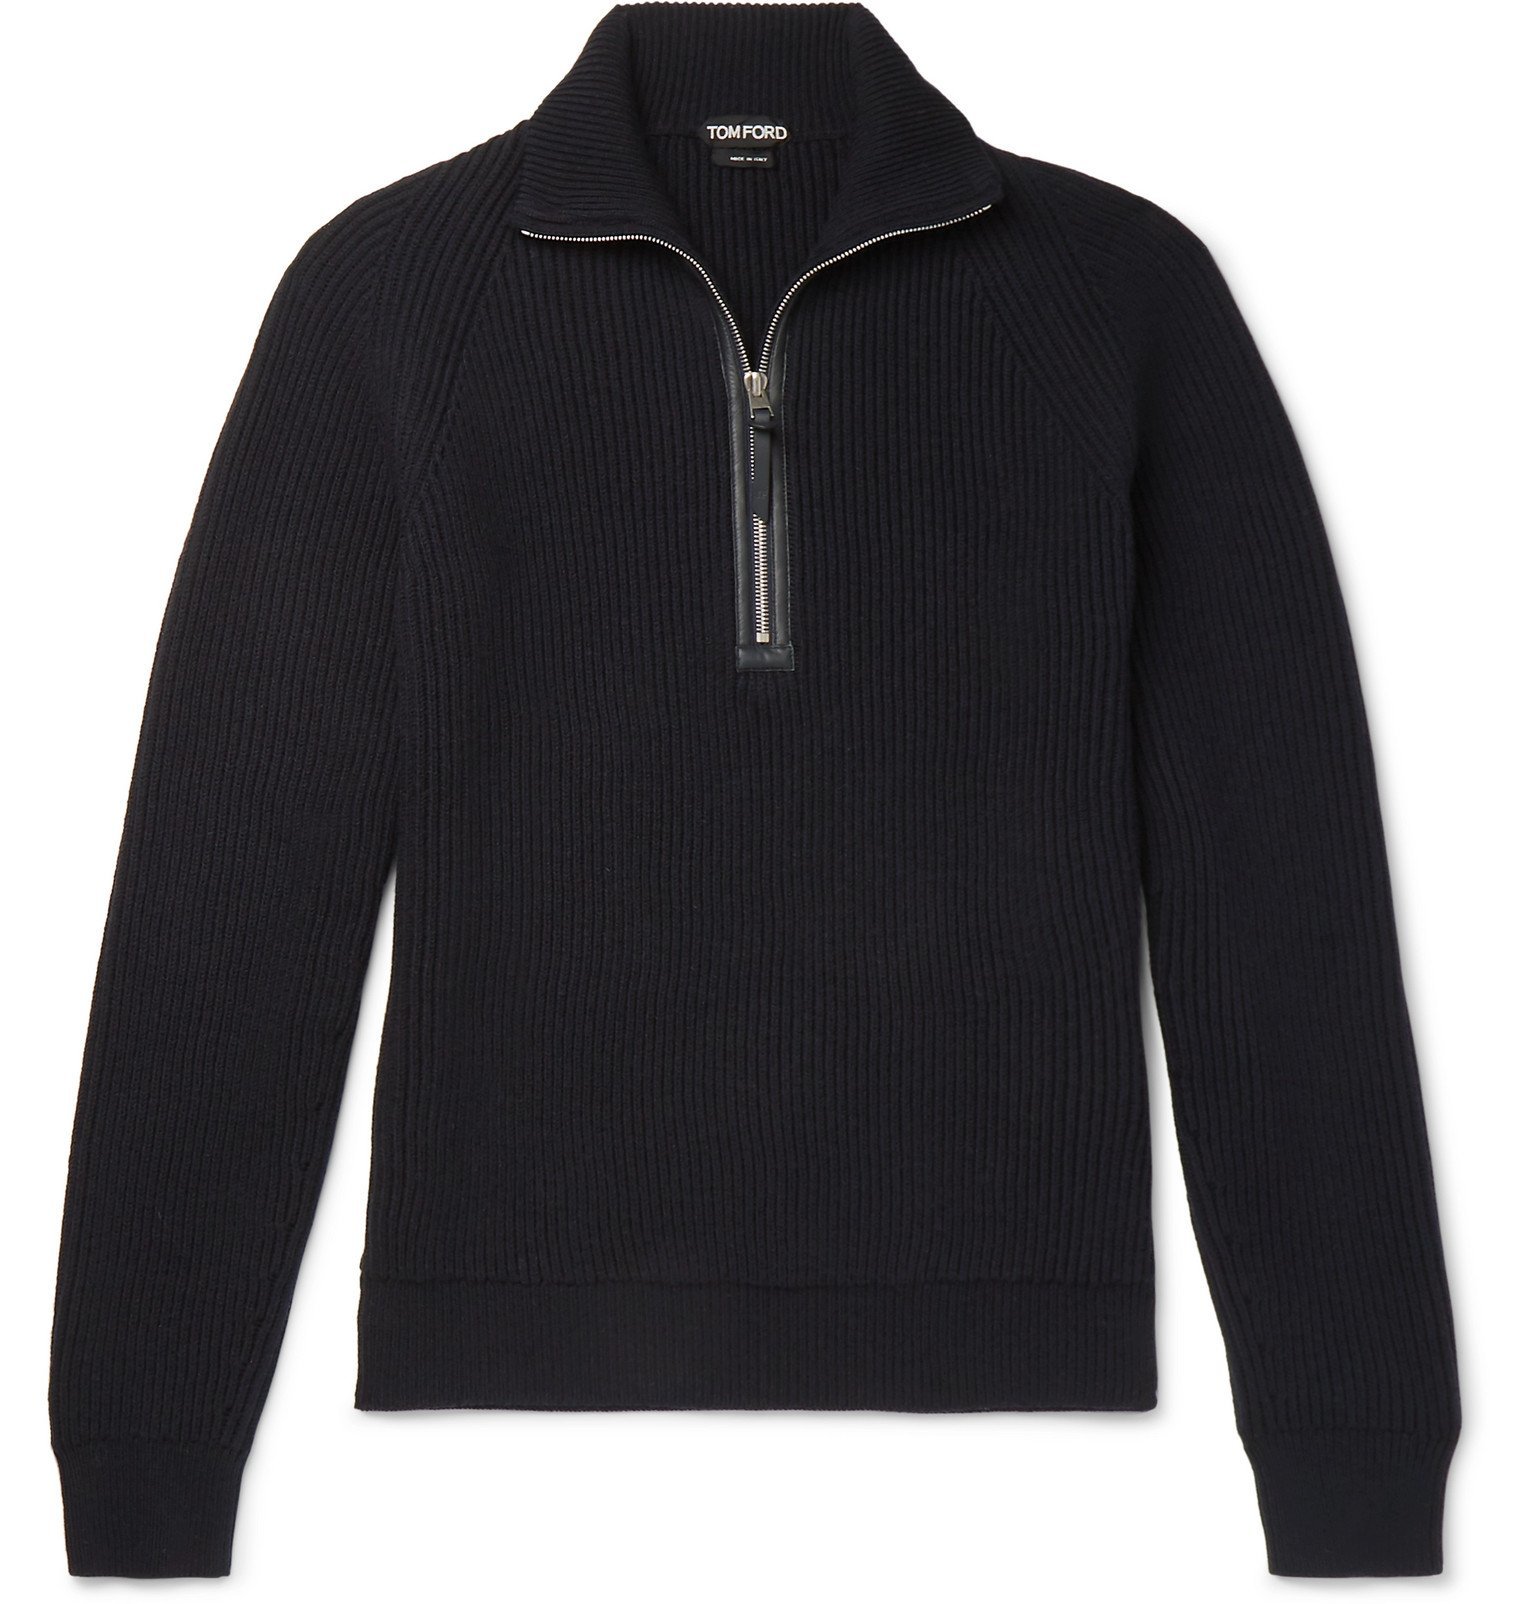 TOM FORD - Slim-Fit Leather-Trimmed Ribbed Merino Wool and Cashmere ...